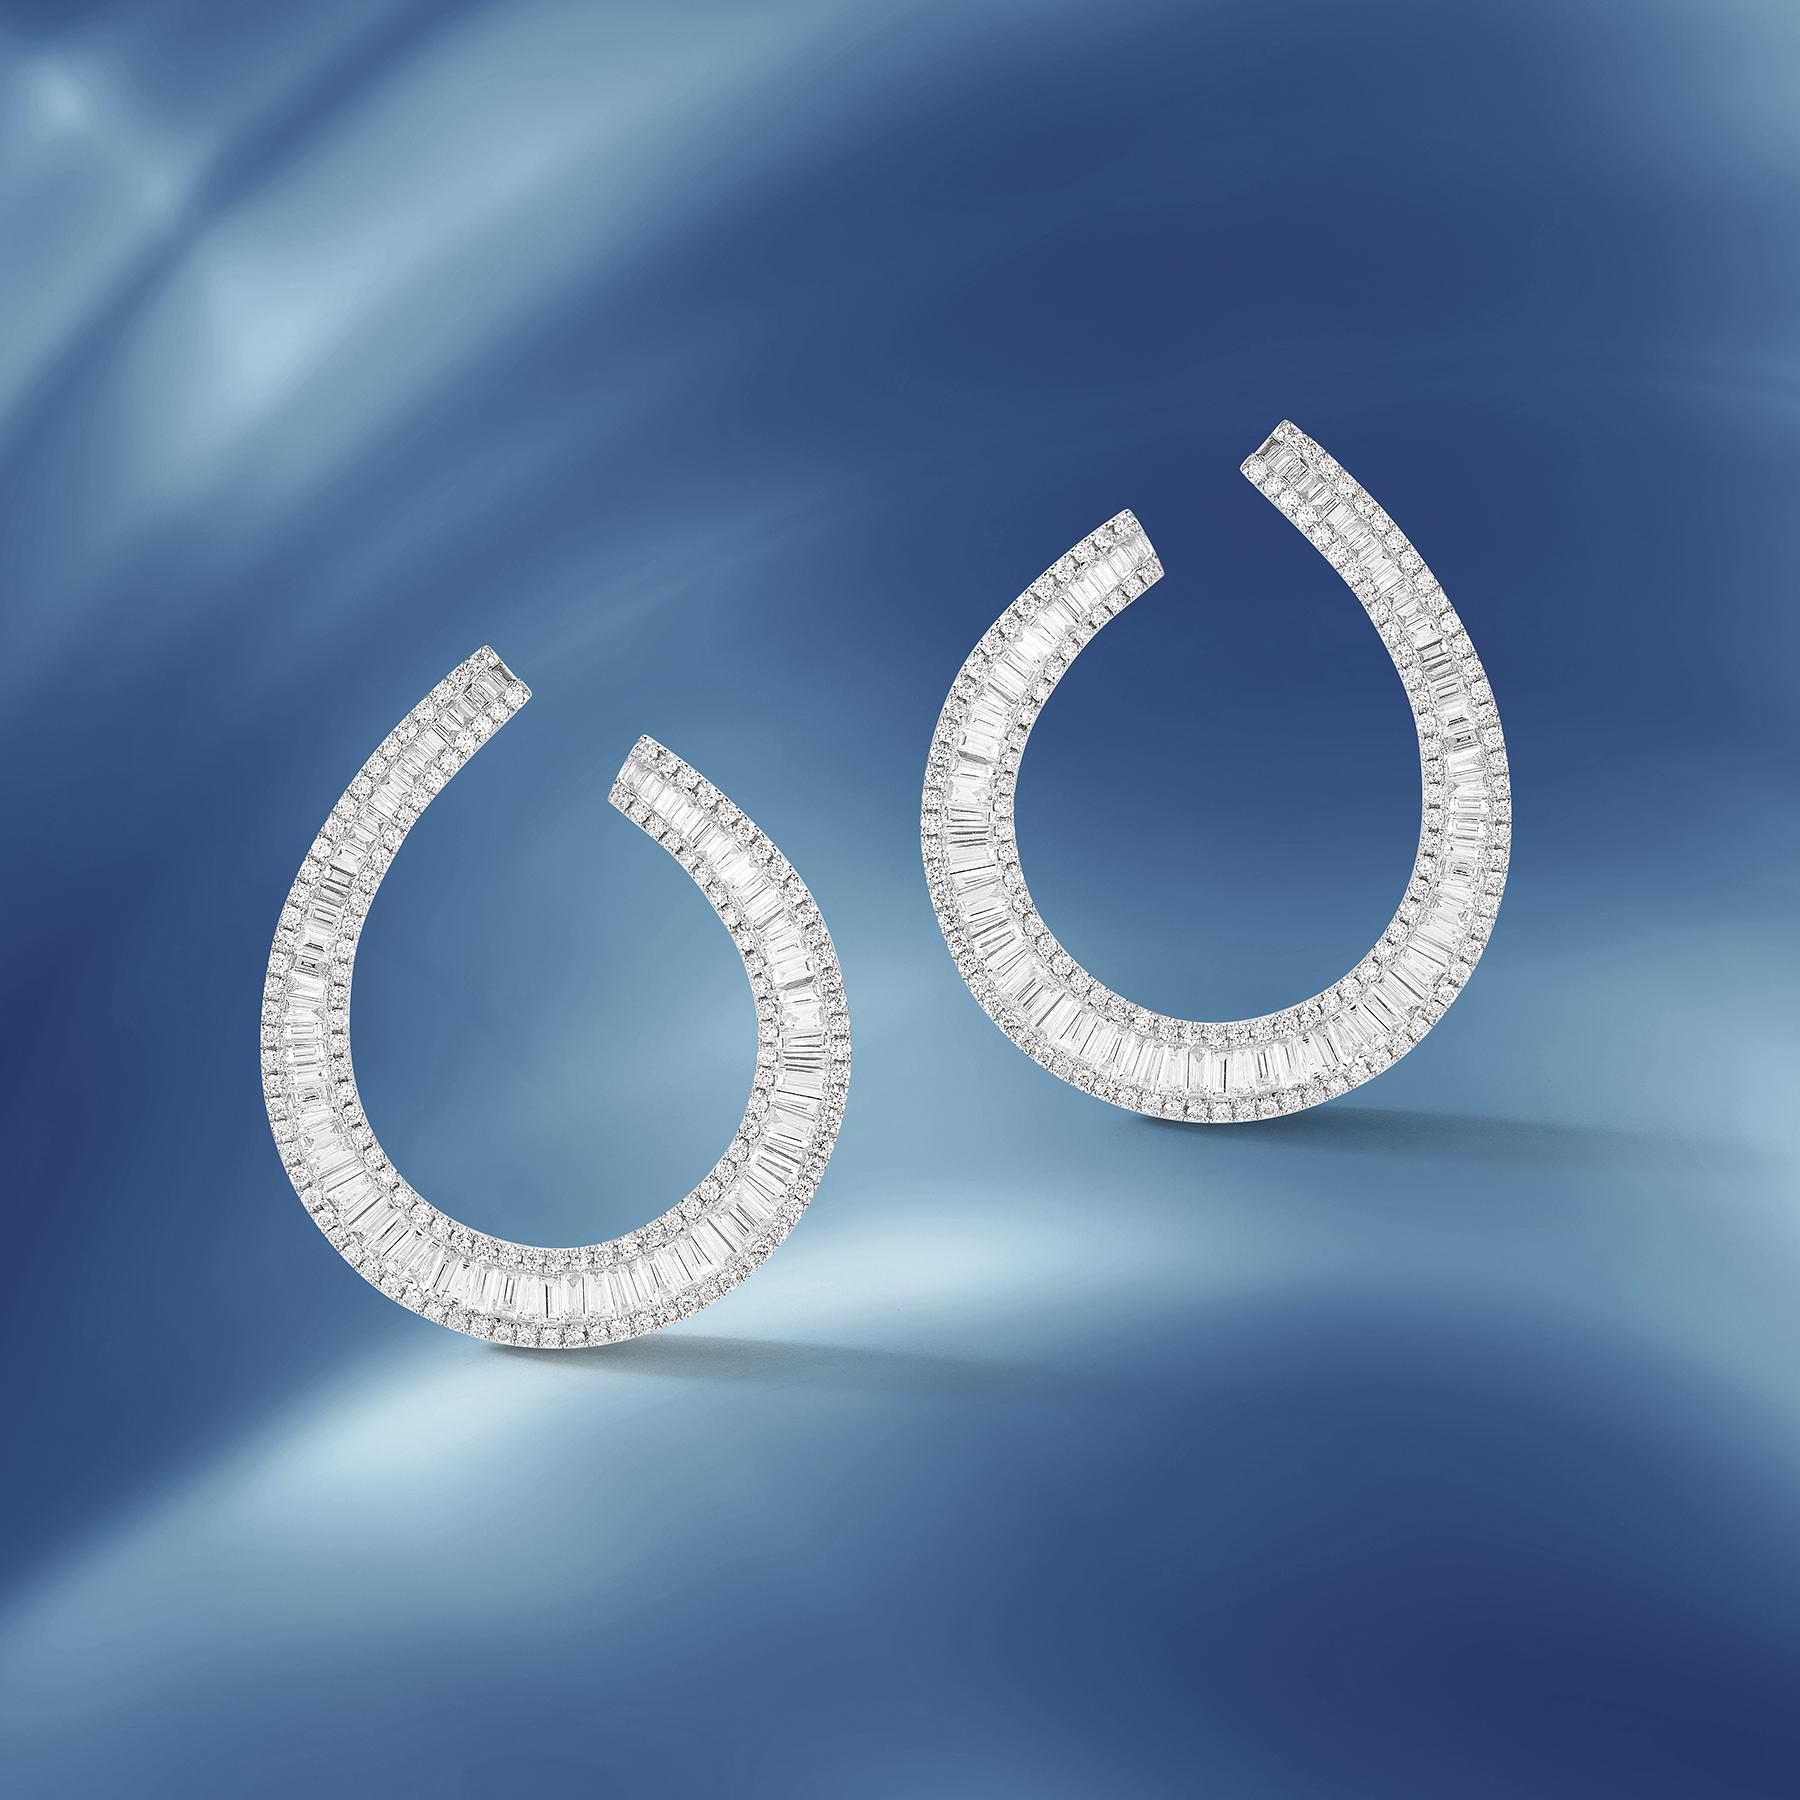 18 Karat Gold Diamond Hoop Earrings, 404 Diamonds, Total Weight 3.49 Carat In New Condition For Sale In Palm Beach, FL